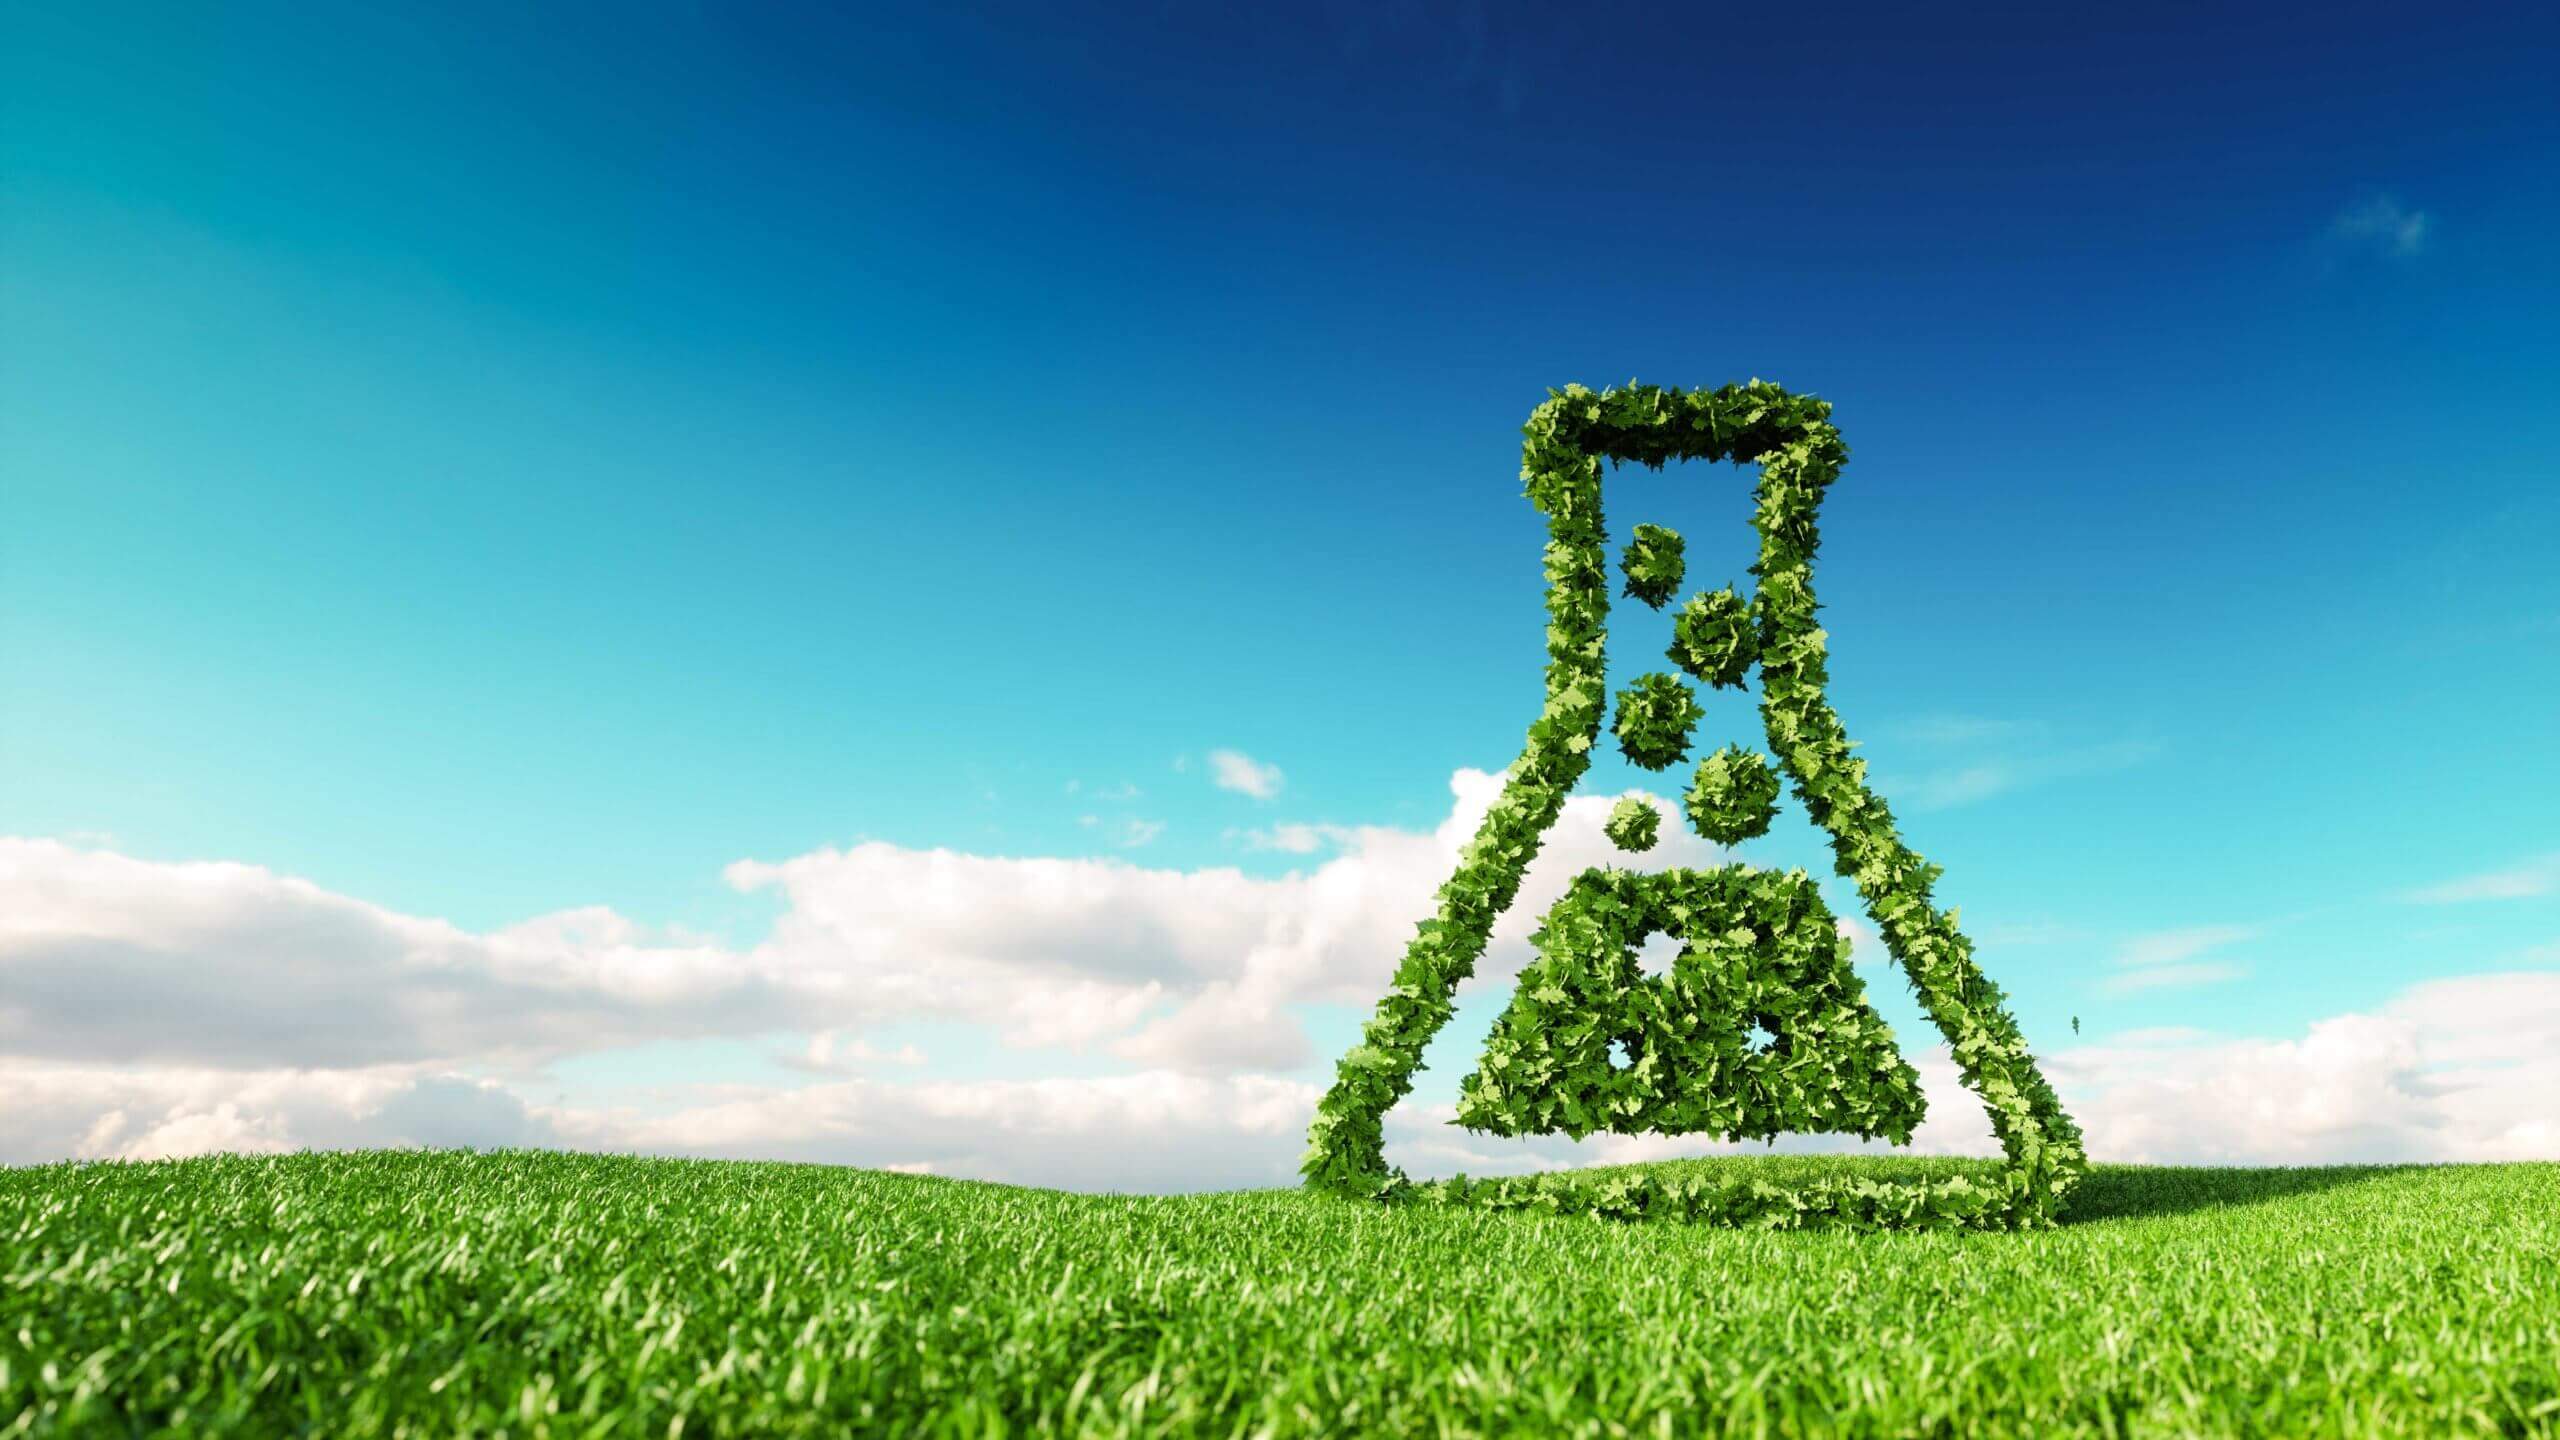 On The Scout For A Profitable Sustainability Business Case In Chemicals